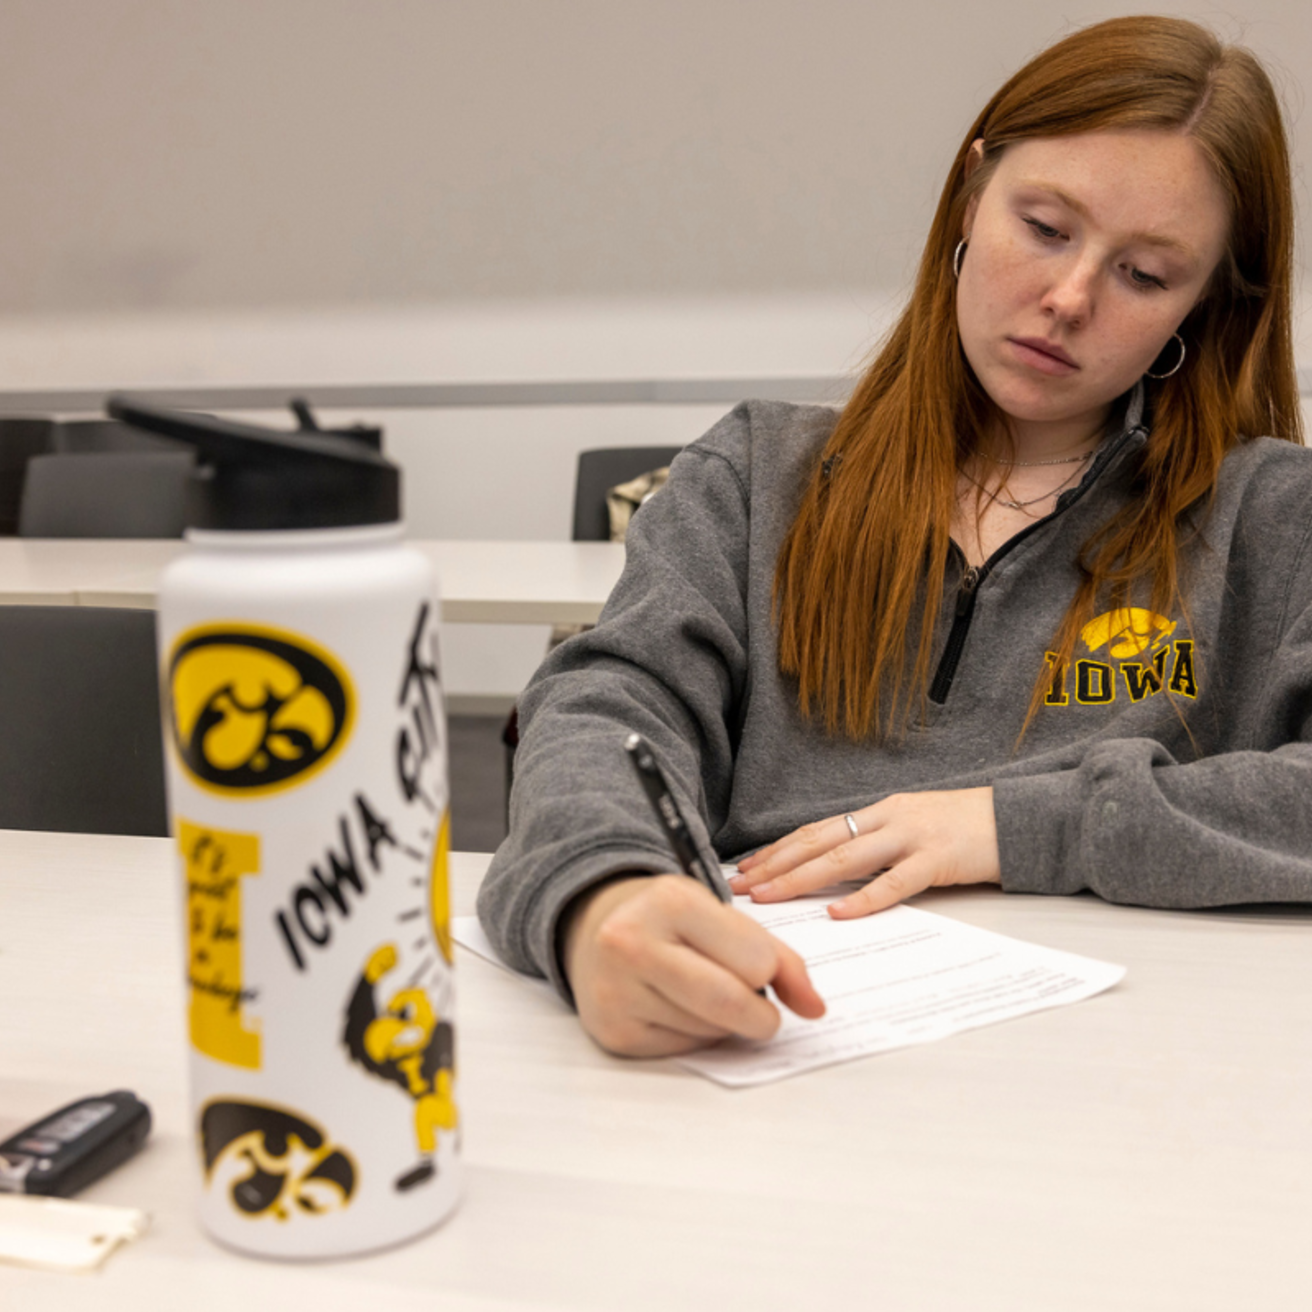 A student in hawkeye gear working hard at studying